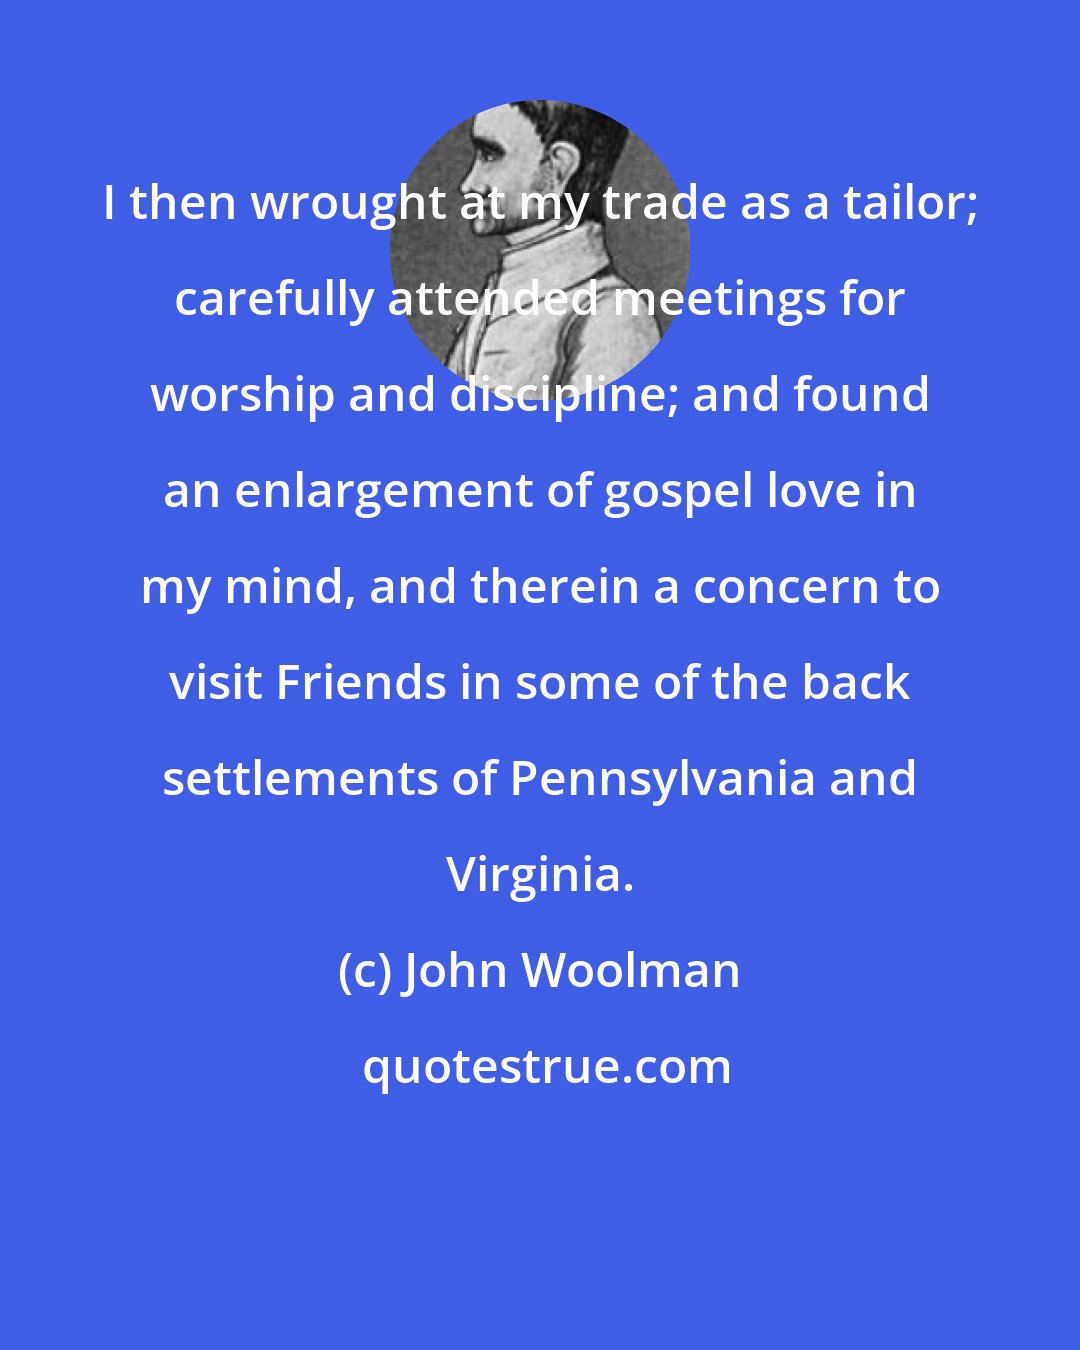 John Woolman: I then wrought at my trade as a tailor; carefully attended meetings for worship and discipline; and found an enlargement of gospel love in my mind, and therein a concern to visit Friends in some of the back settlements of Pennsylvania and Virginia.